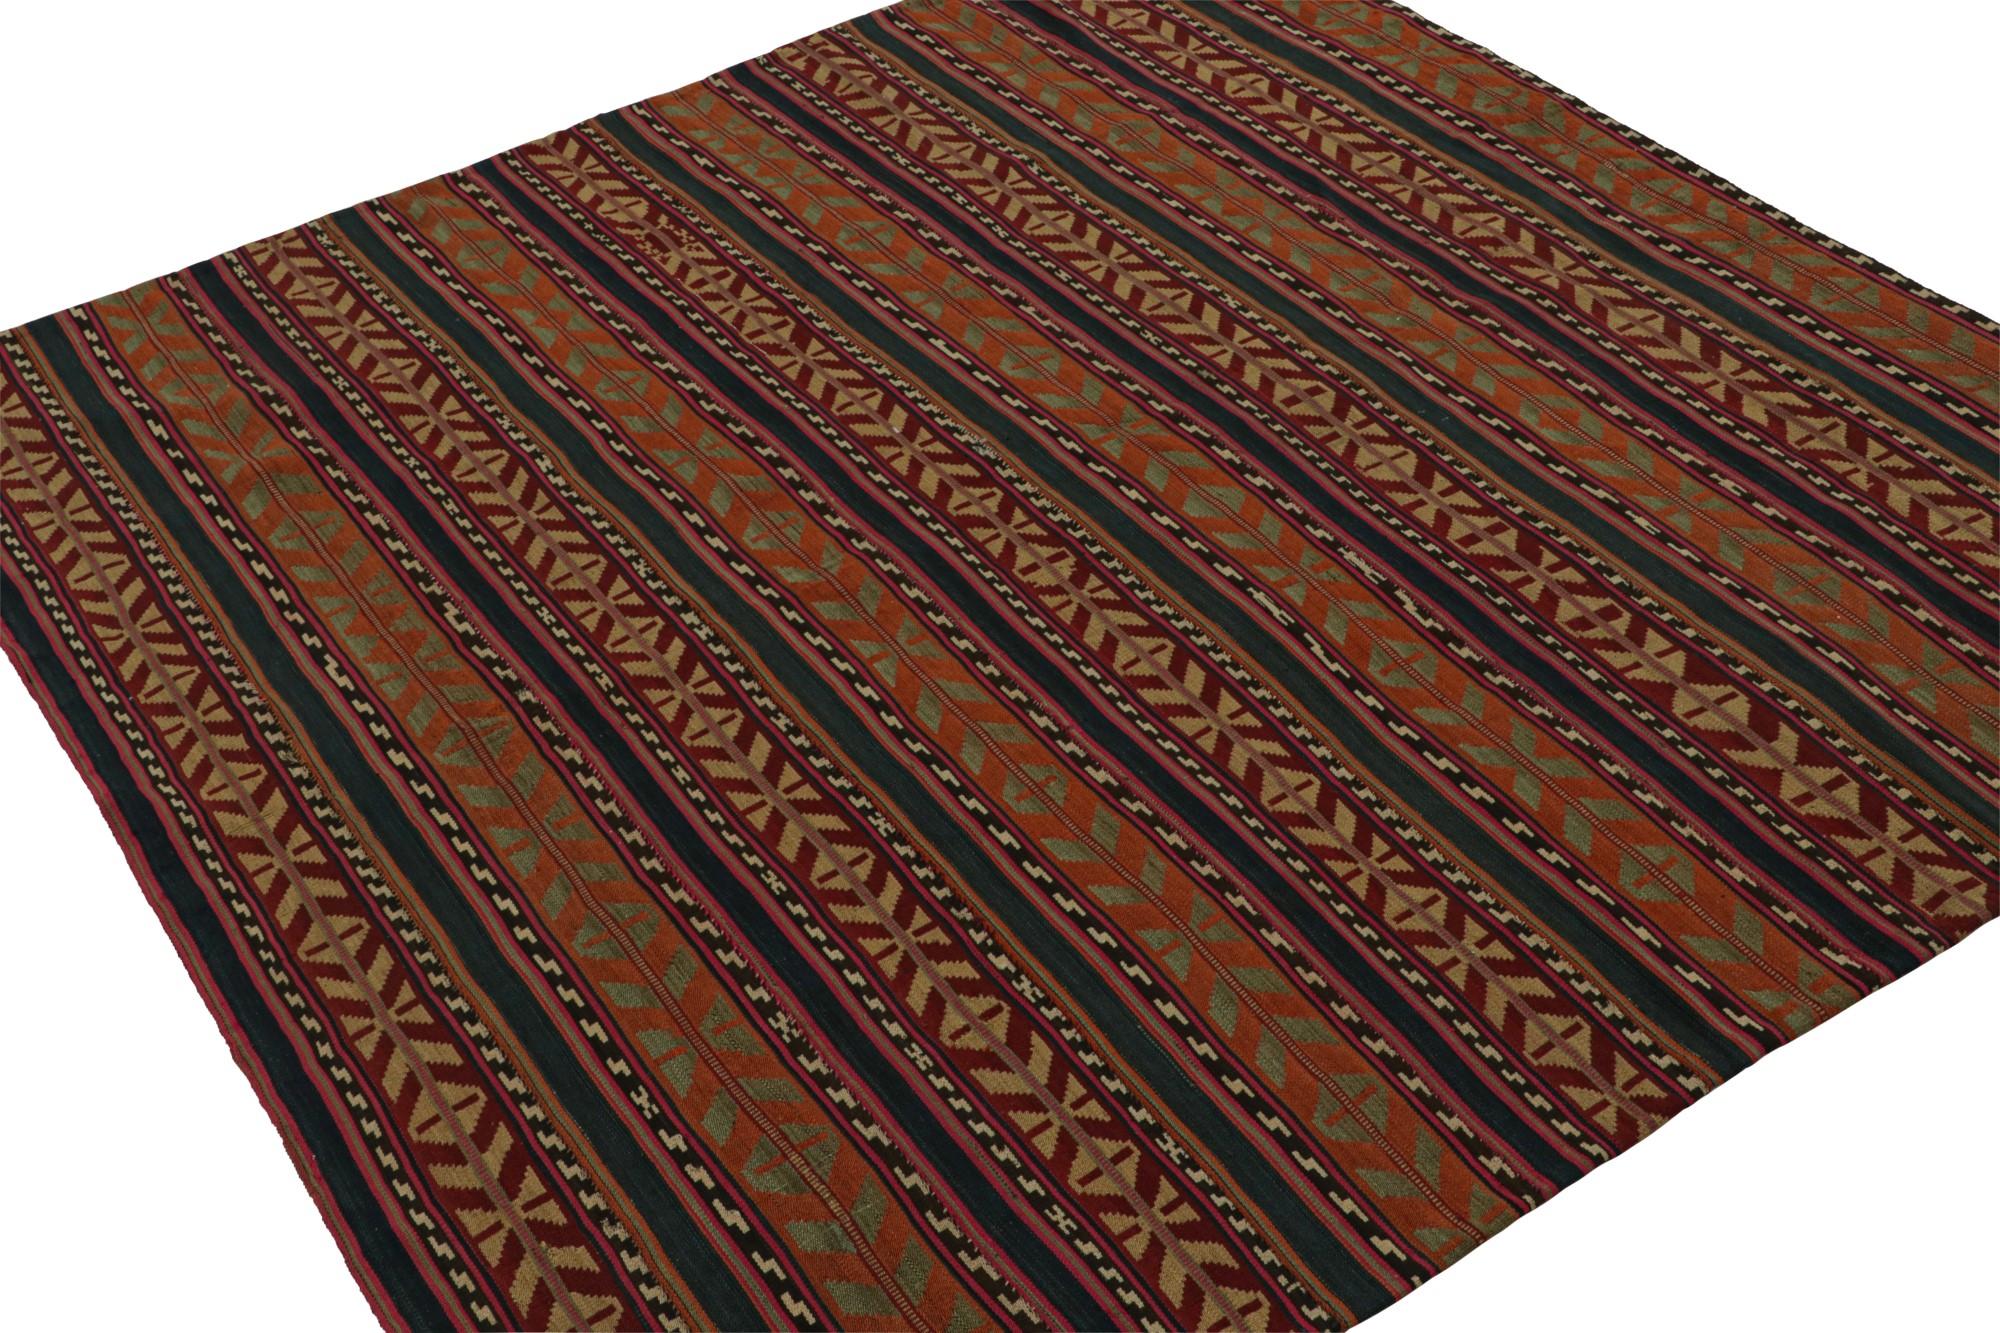 This vintage 6x6 tribal Kilim is a new addition to Rug & Kilim’s mid-century curations. Handwoven in wool, it originates from Afghanistan circa 1950-1960.

On the Design: 

This square flat weave enjoys tribal geometric patterns and stripes in